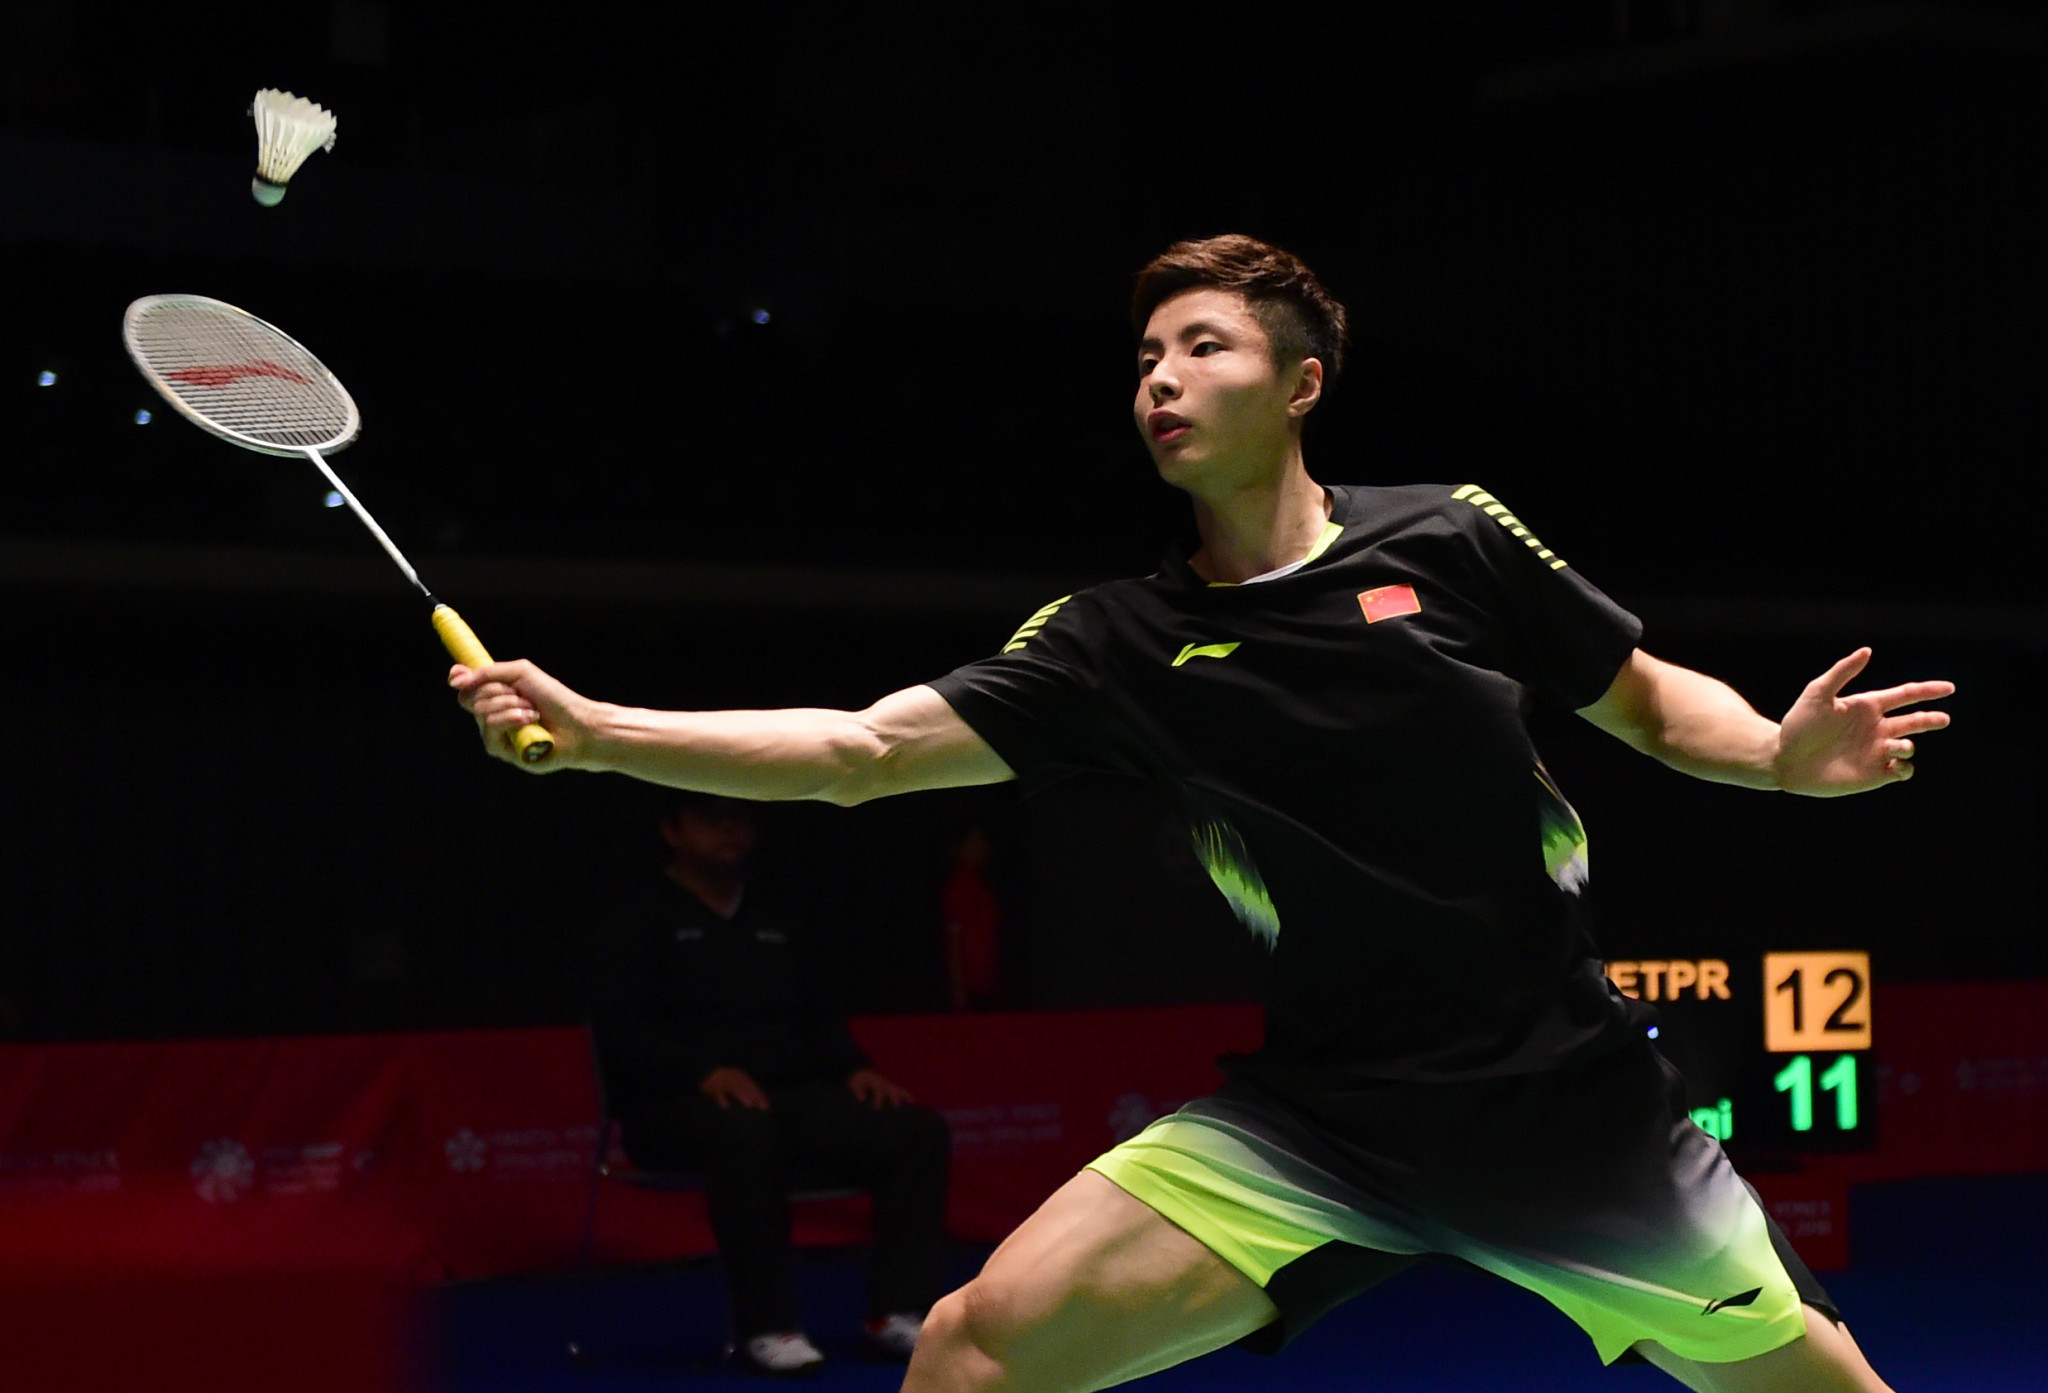 Shi Yuqi delighted the home crowd by securing his place in the semi-finals of the BWF China Open in Changzhou today ©Getty Images